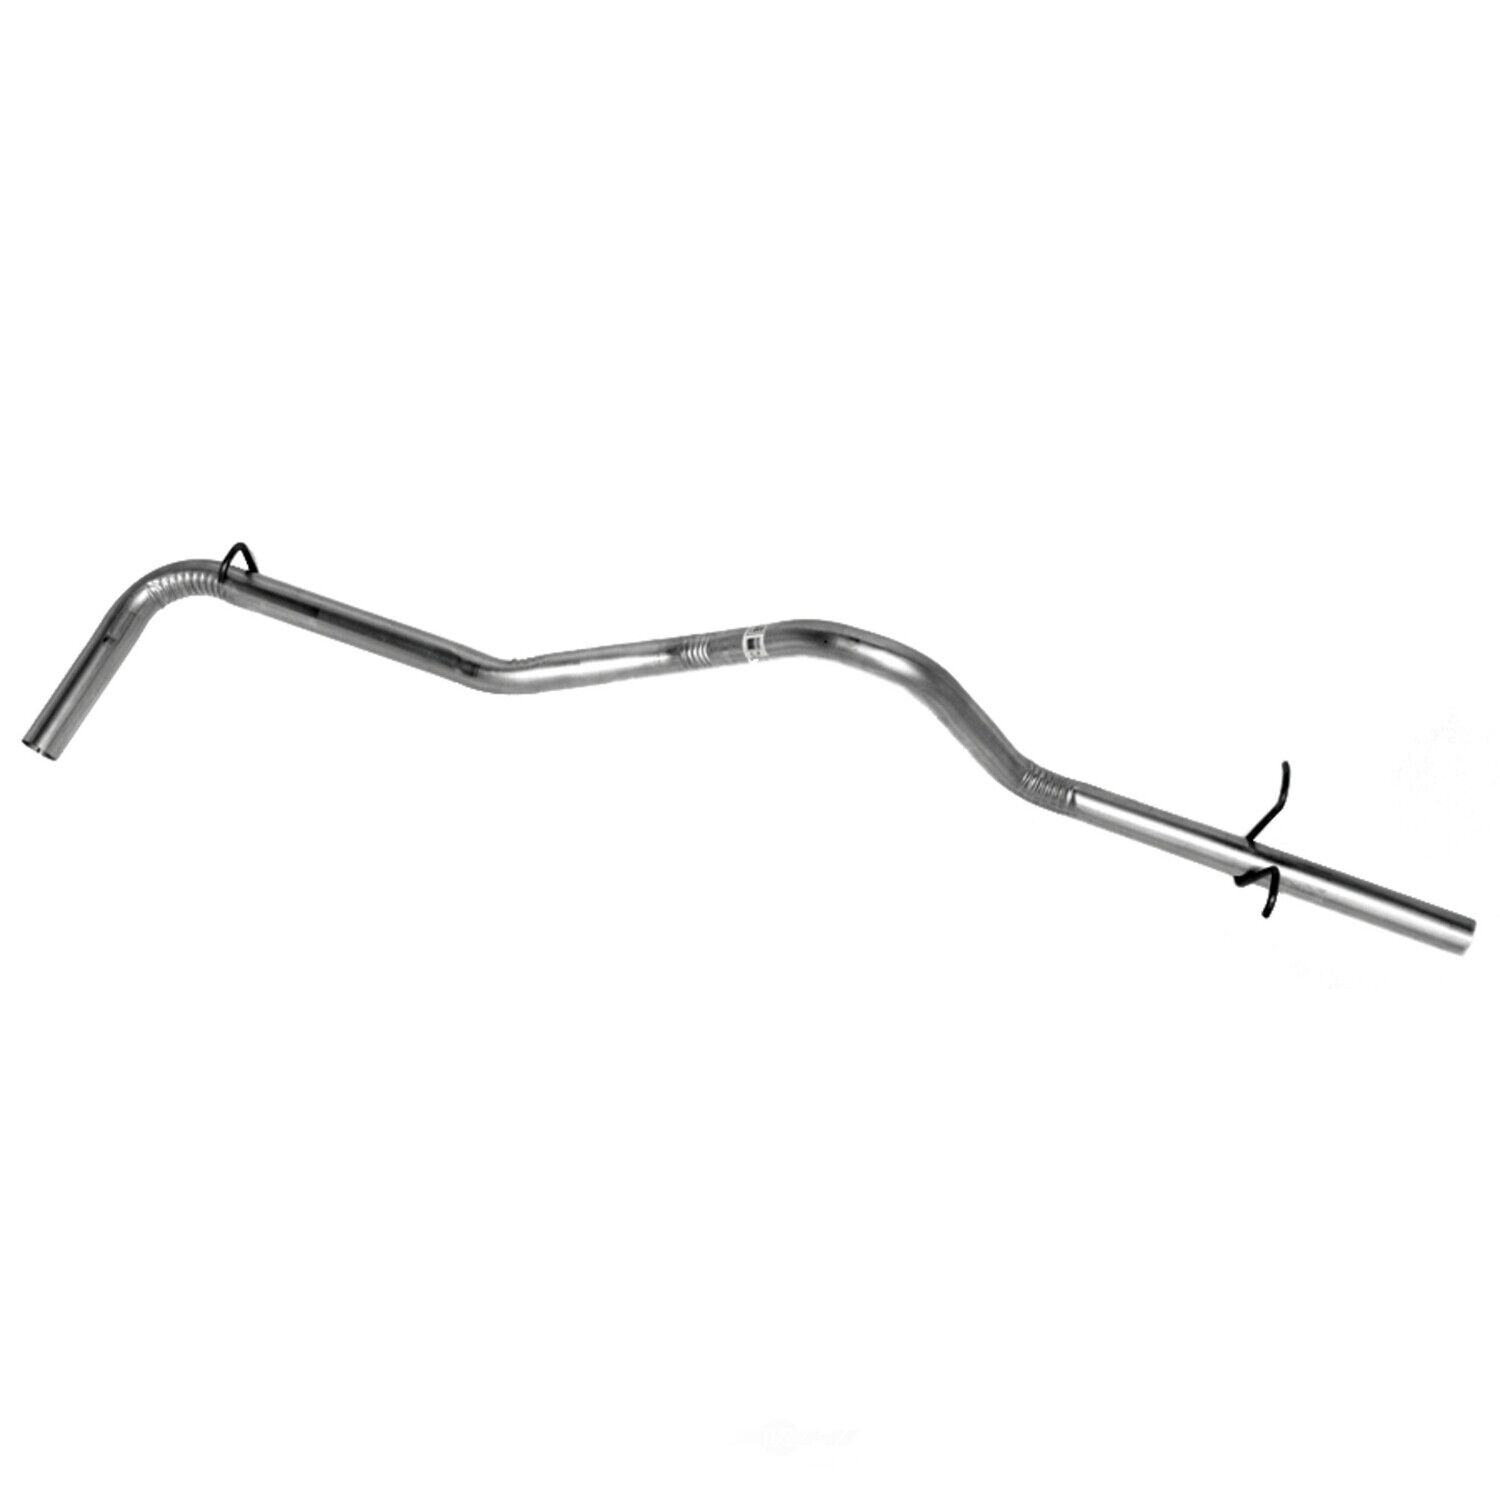 Tail Pipe For 1986-1992 Jeep Comanche 1988 1987 1989 1990 1991 Walker 47605